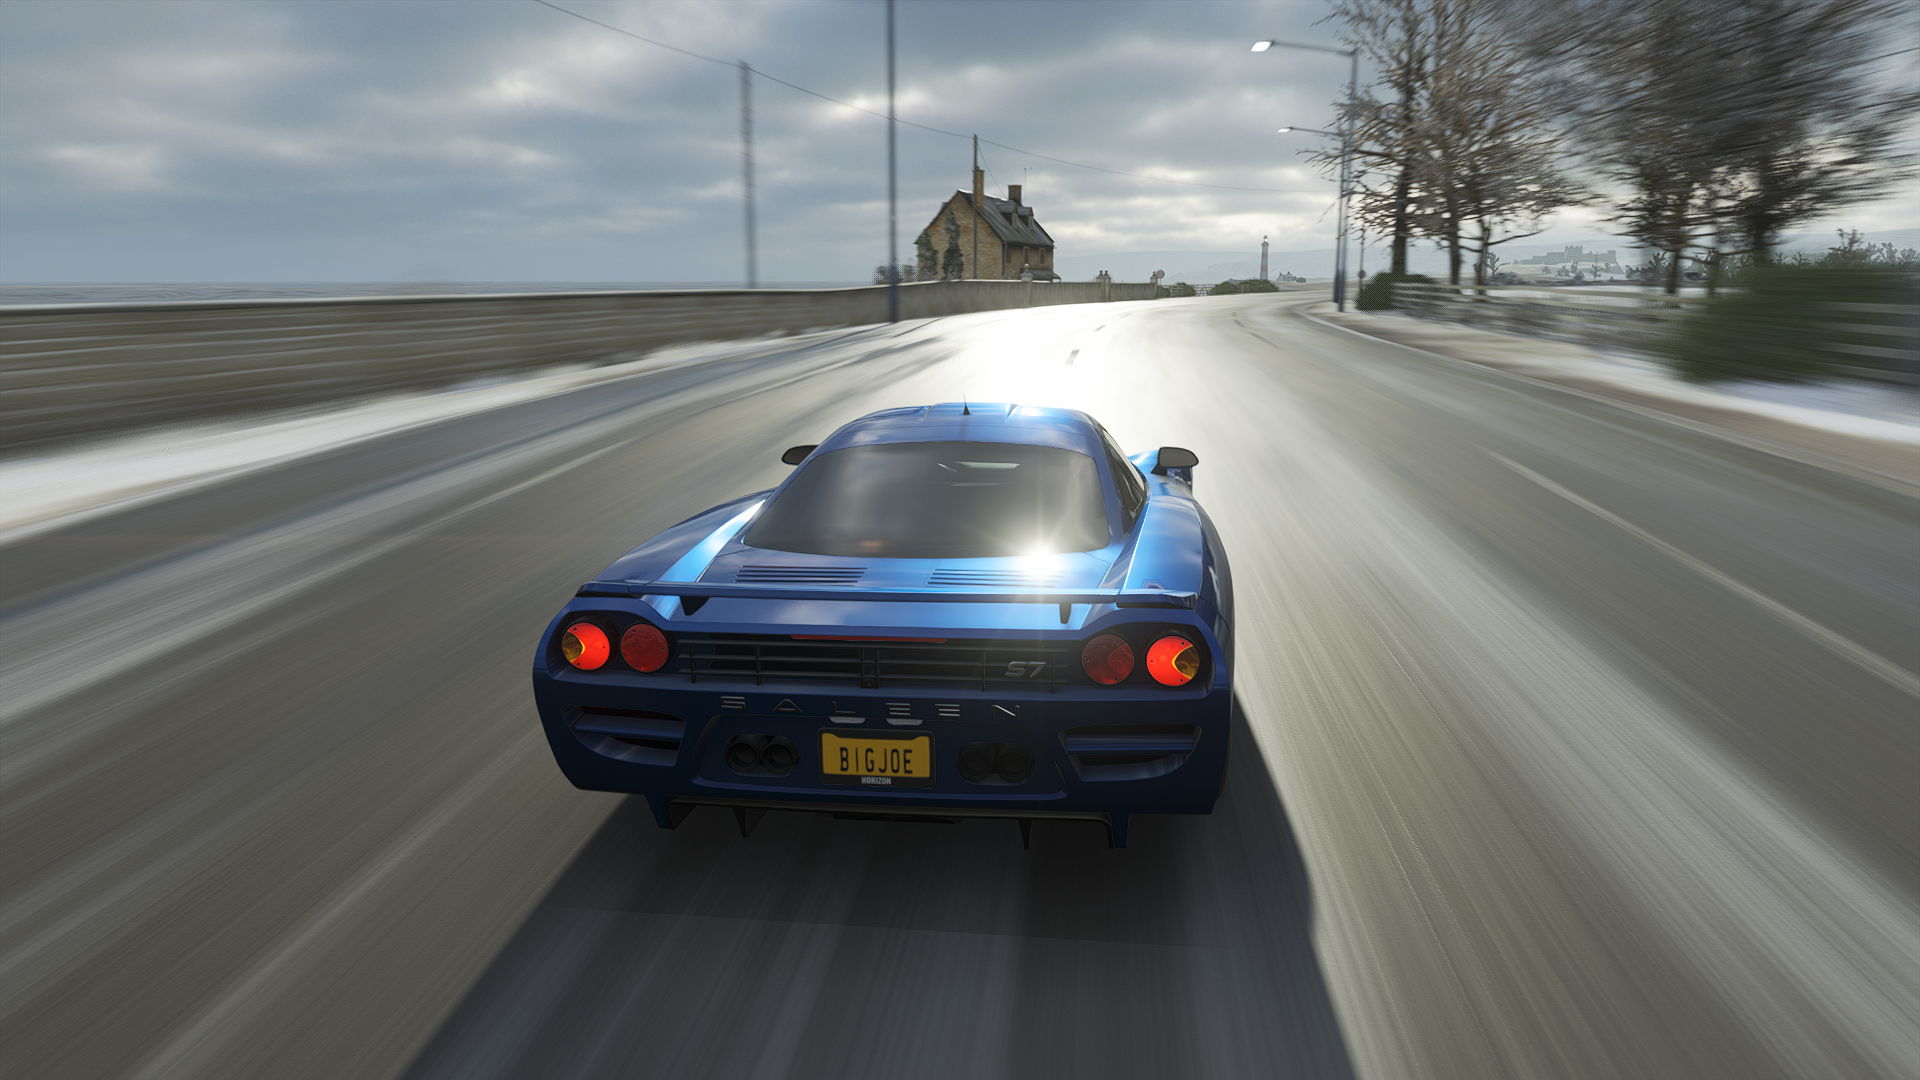 General 1920x1080 Forza Horizon 4 Forza Horizon Forza driving CGI car supercars Saleen S7 vehicle rear view taillights licence plates road sky clouds trees street light blurred blurry background video game art video games